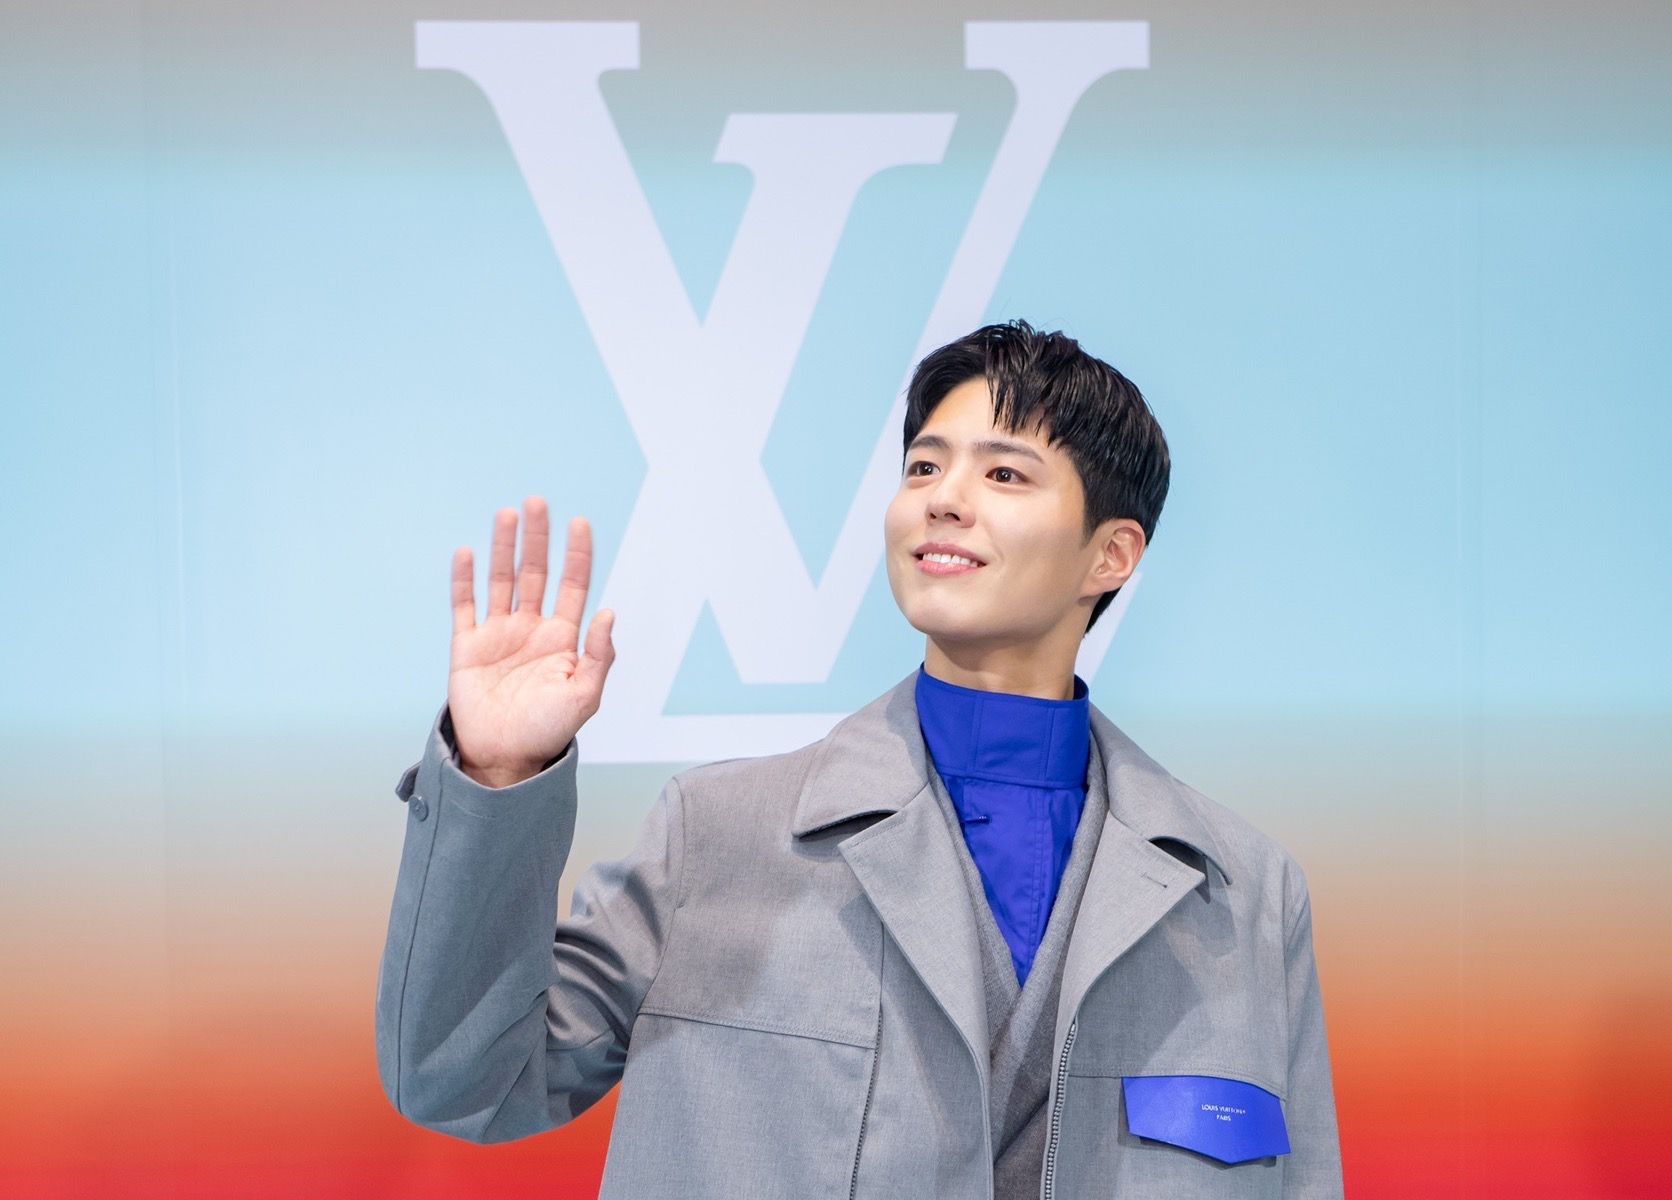 7 Looks We Love From Louis Vuitton's Fall/Winter 2021 Men's Spin